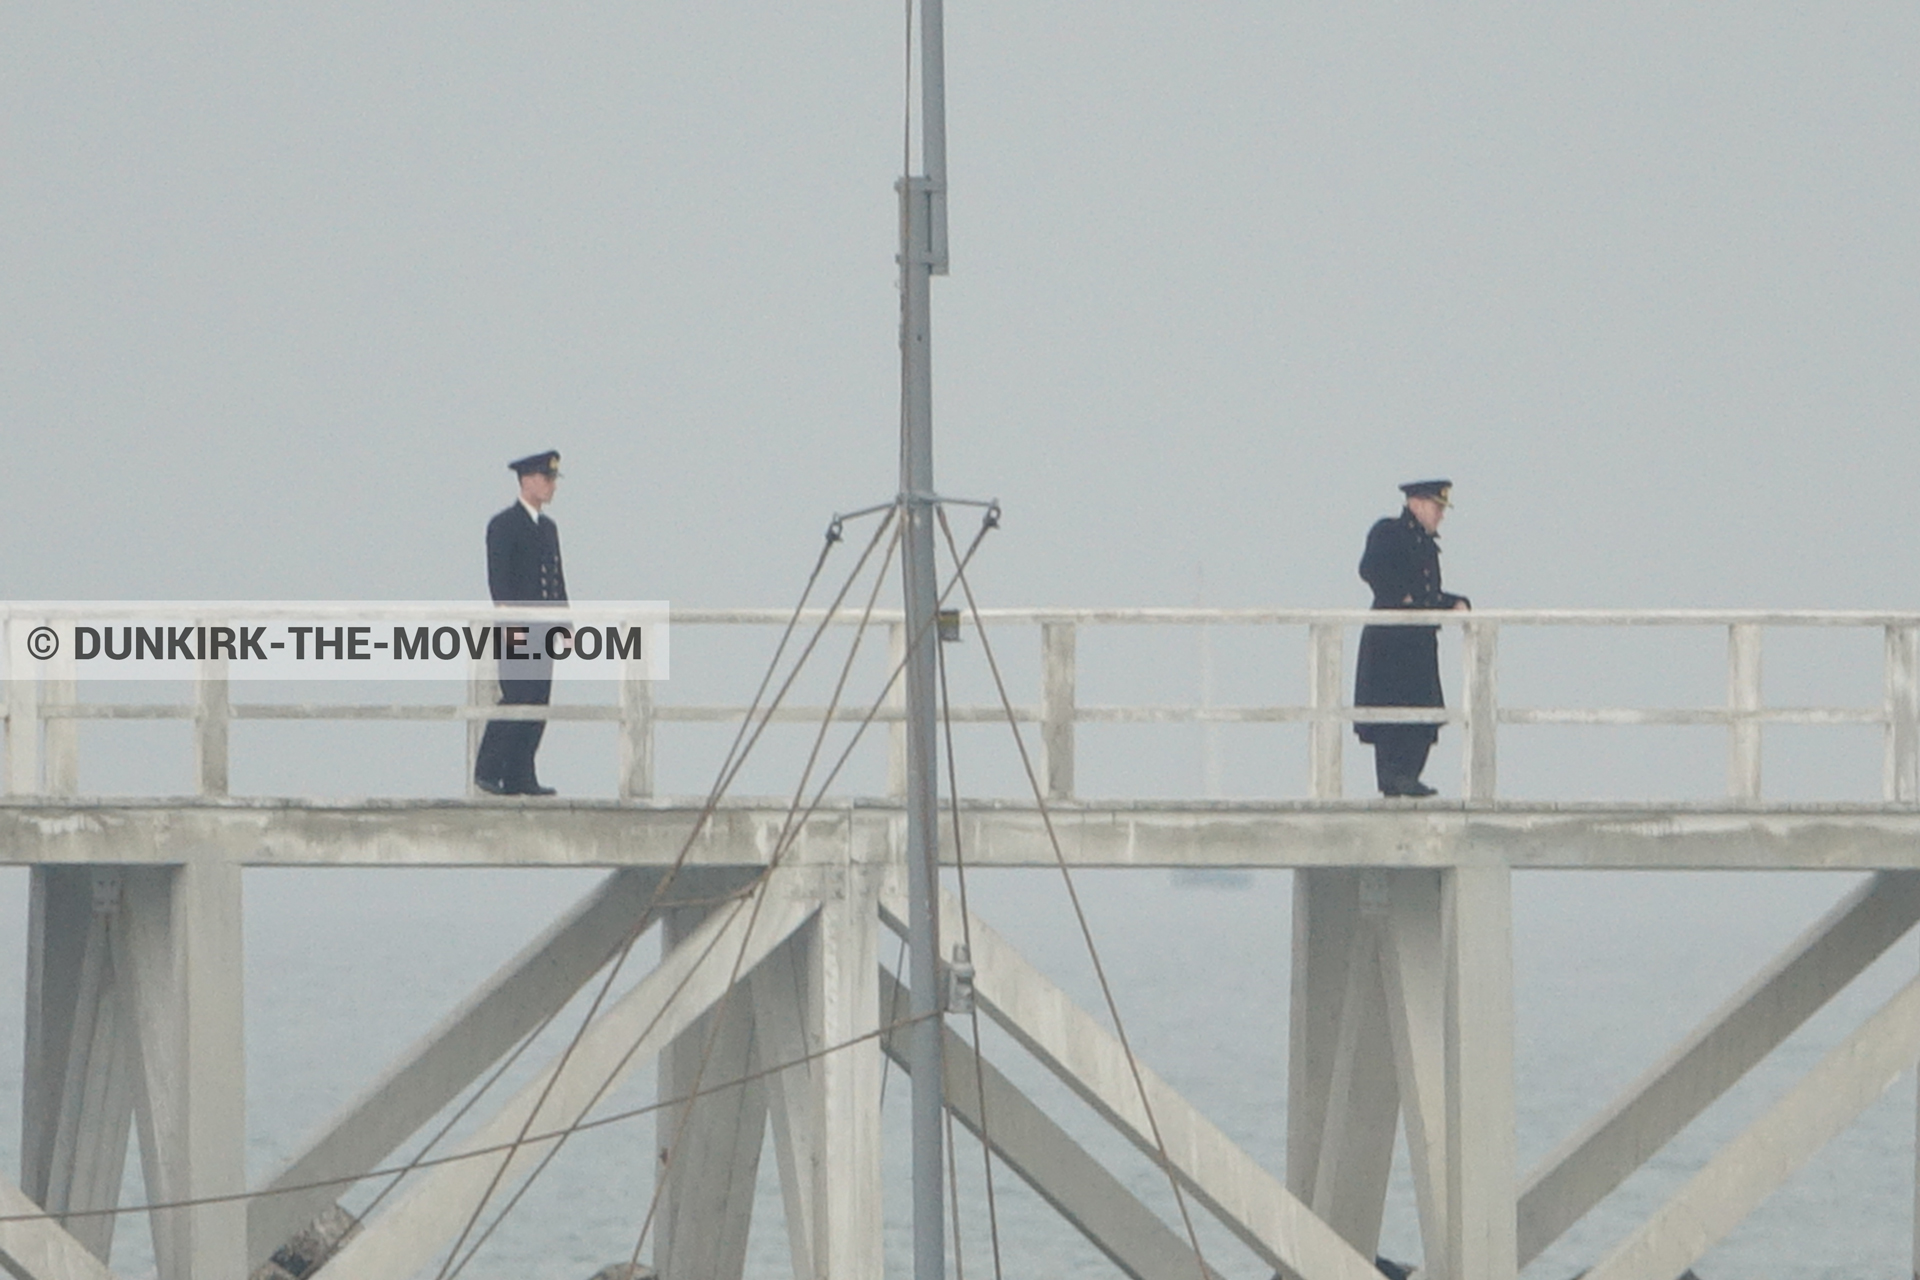 Picture with actor, grey sky, decor, EST pier, Kenneth Branagh,  from behind the scene of the Dunkirk movie by Nolan